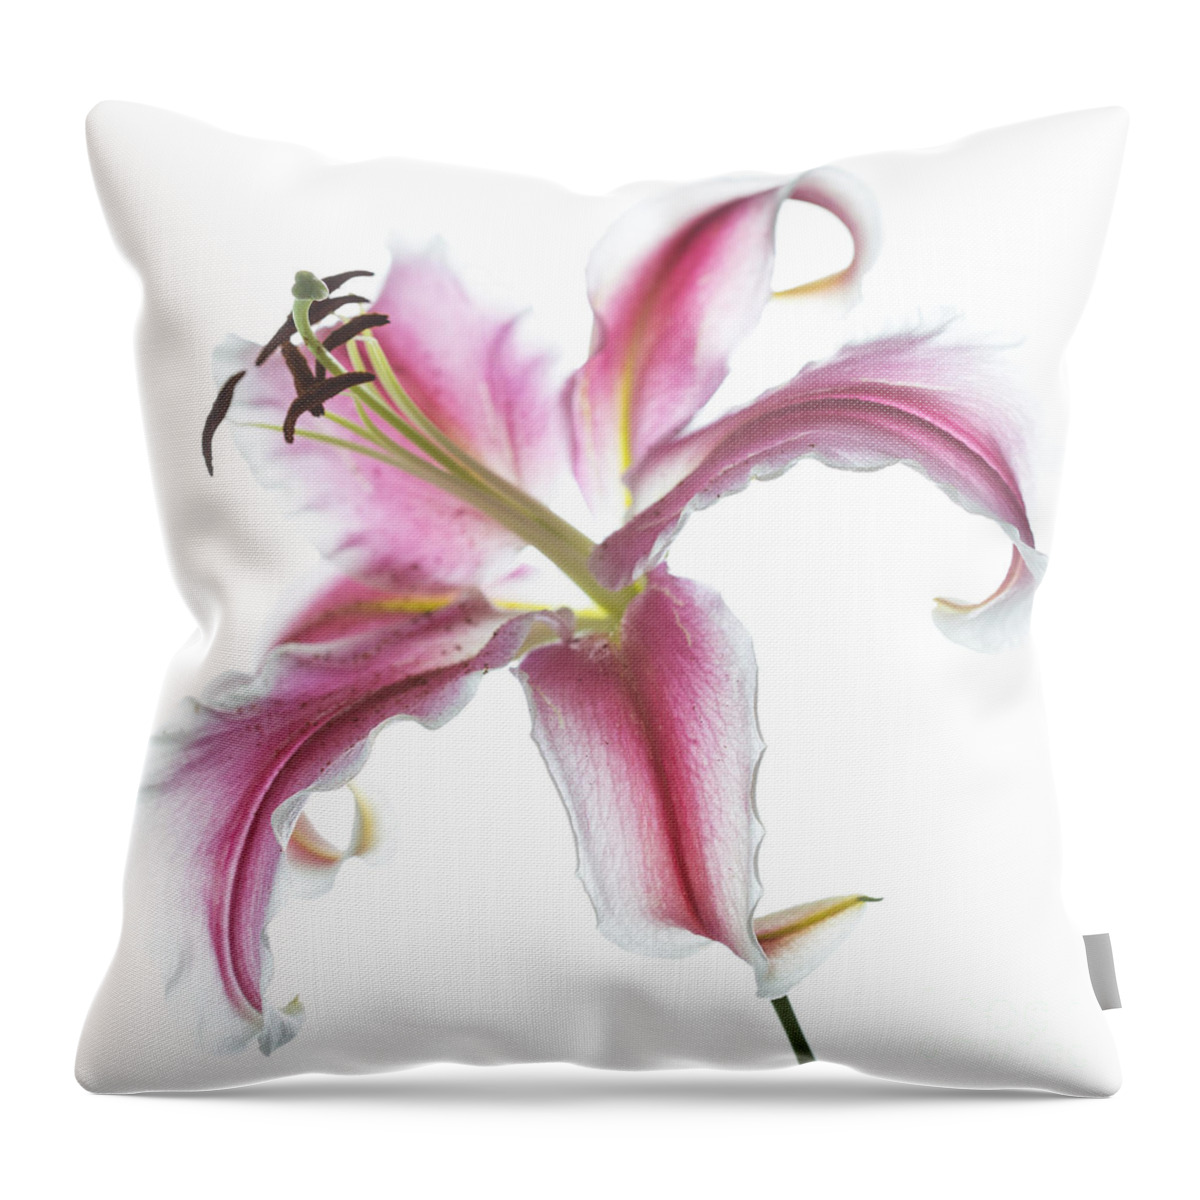 Lily Throw Pillow featuring the photograph Pink Lily by Elena Nosyreva